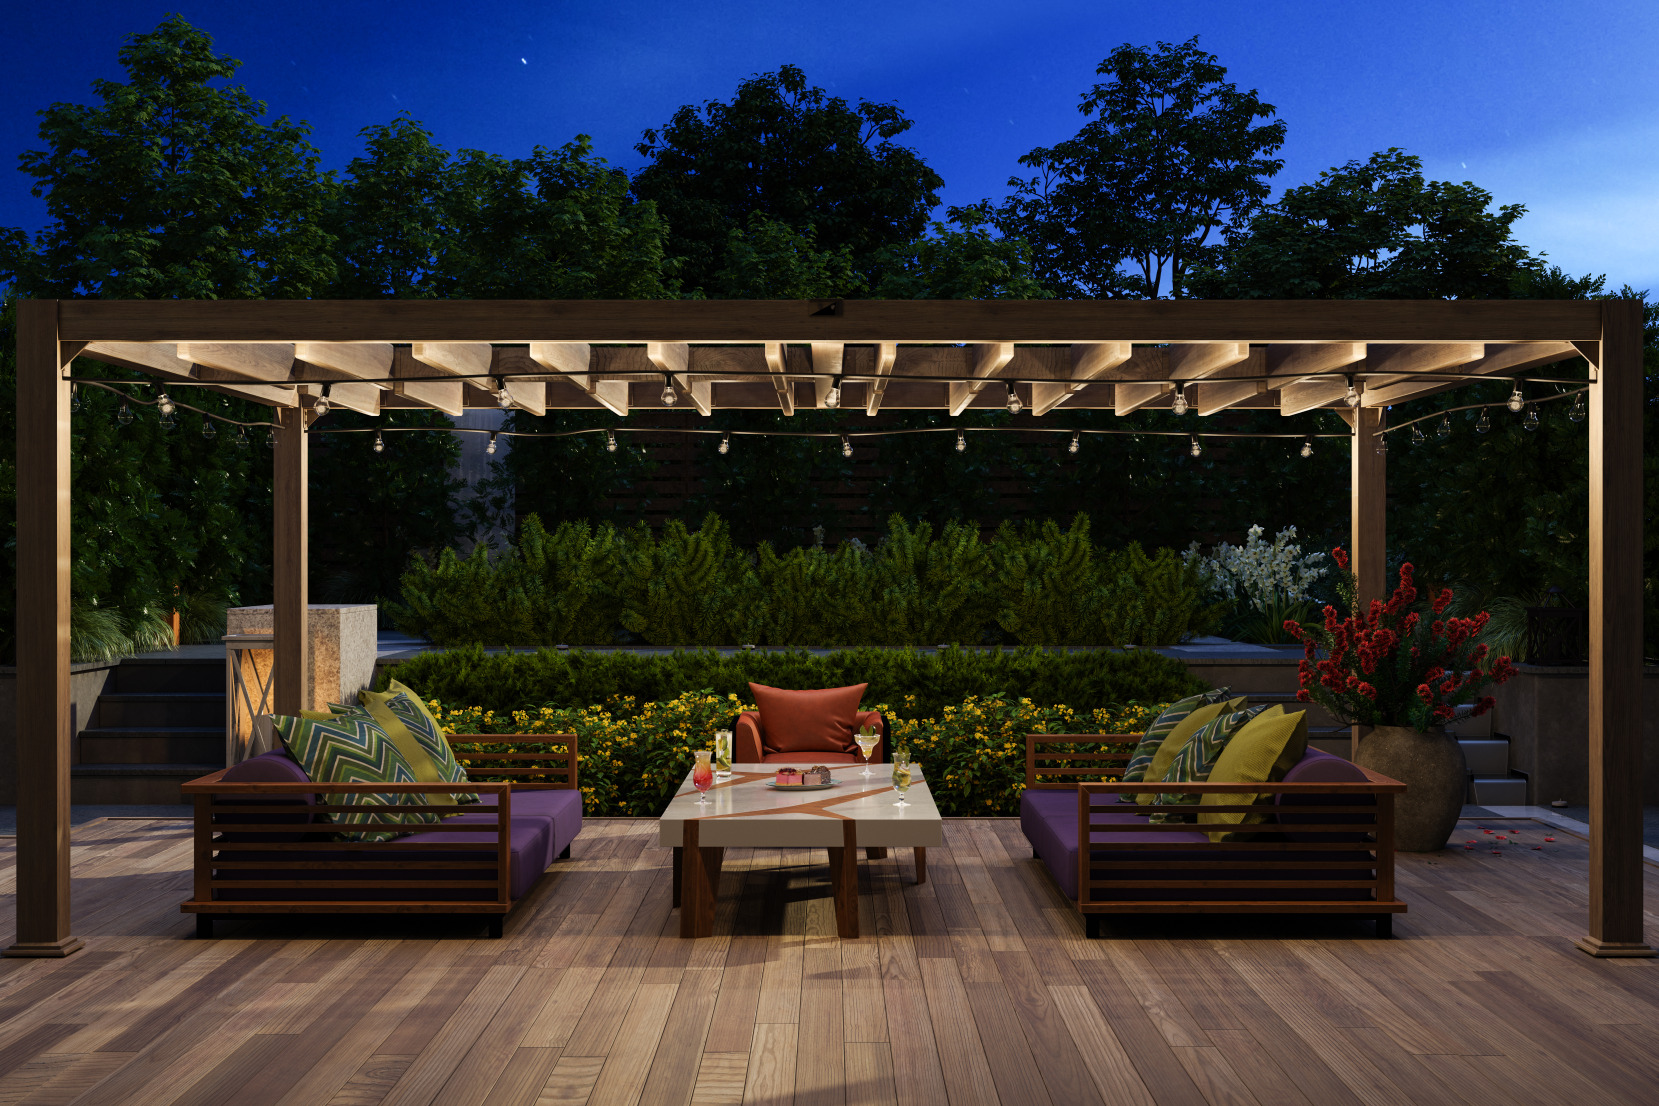 A modern patio with sofas and a coffee table can be the perfect entertaining space after building your own house.